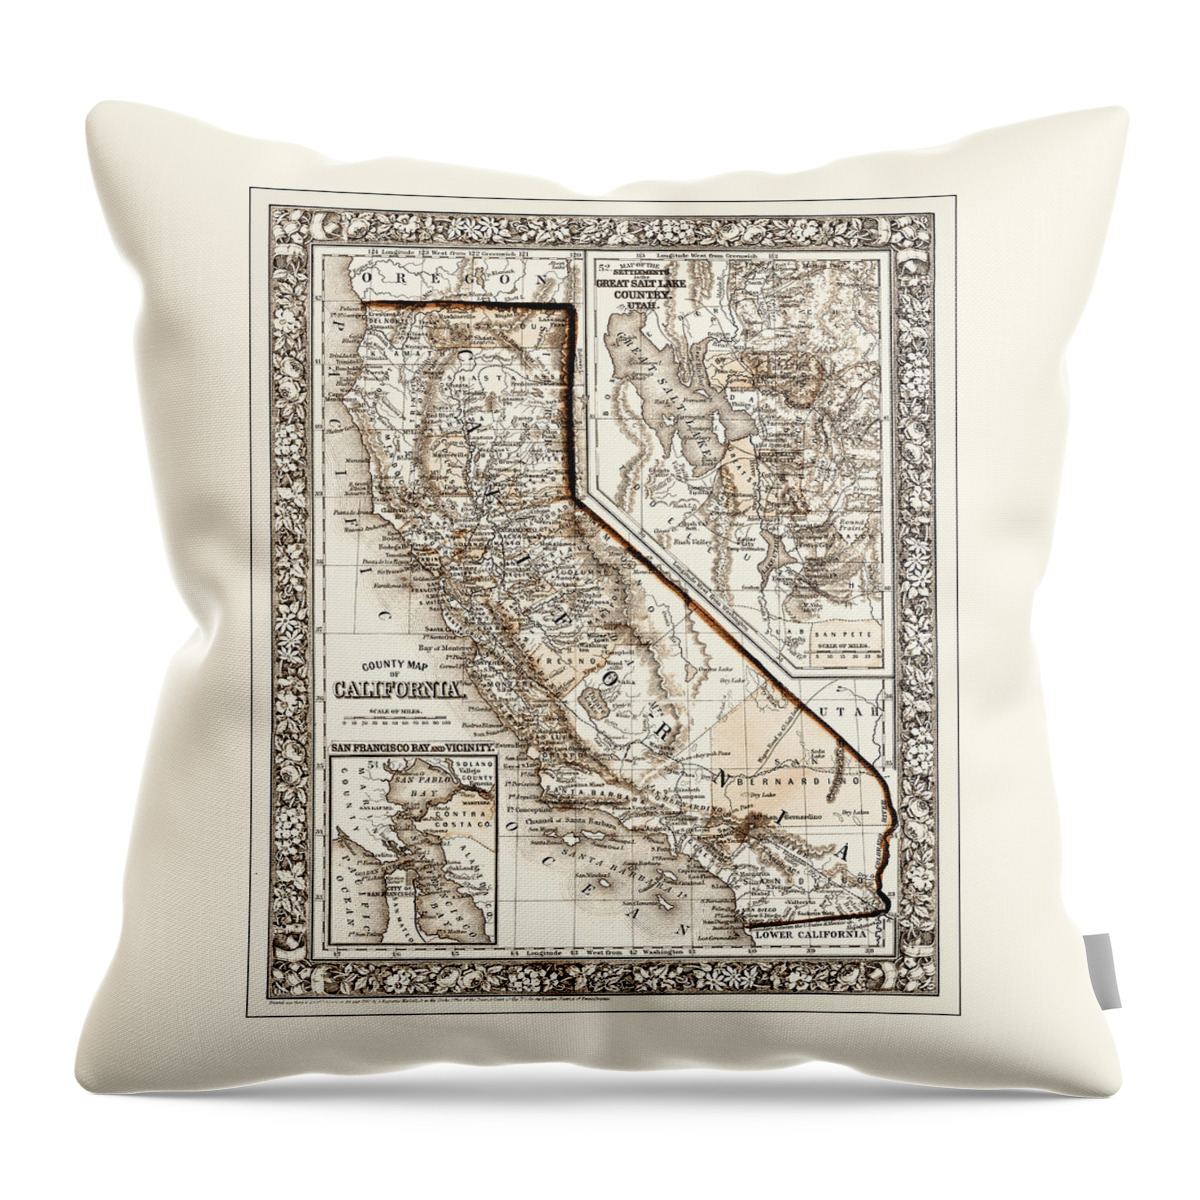 California Throw Pillow featuring the photograph California Vintage County Map 1860 Sepia by Carol Japp